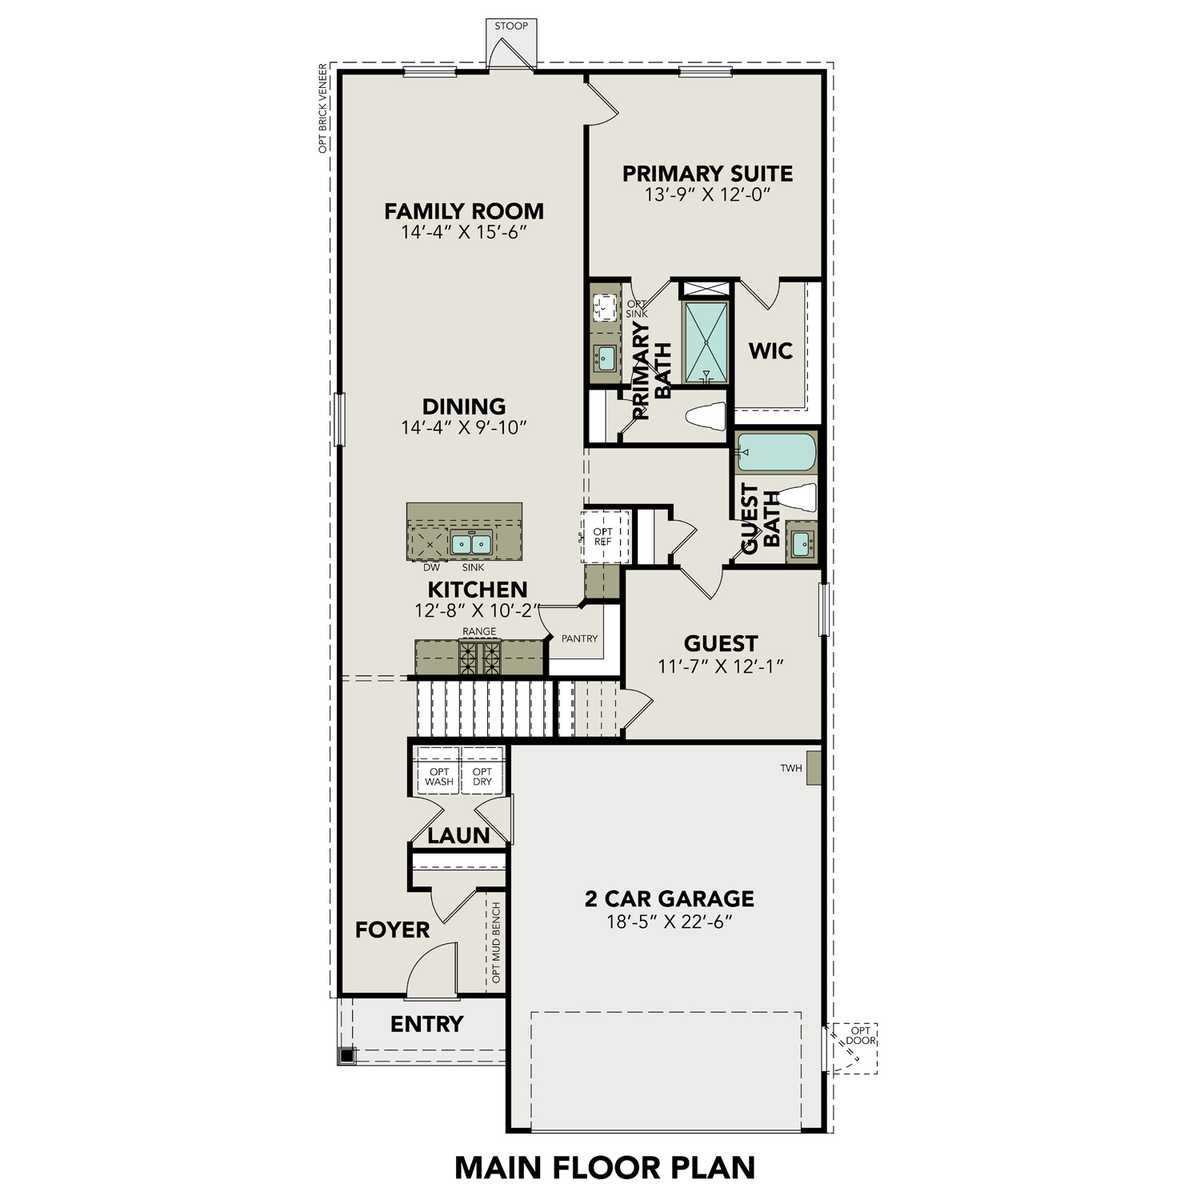 1 - The Sabine A buildable floor plan layout in Davidson Homes' Applewhite Meadows community.